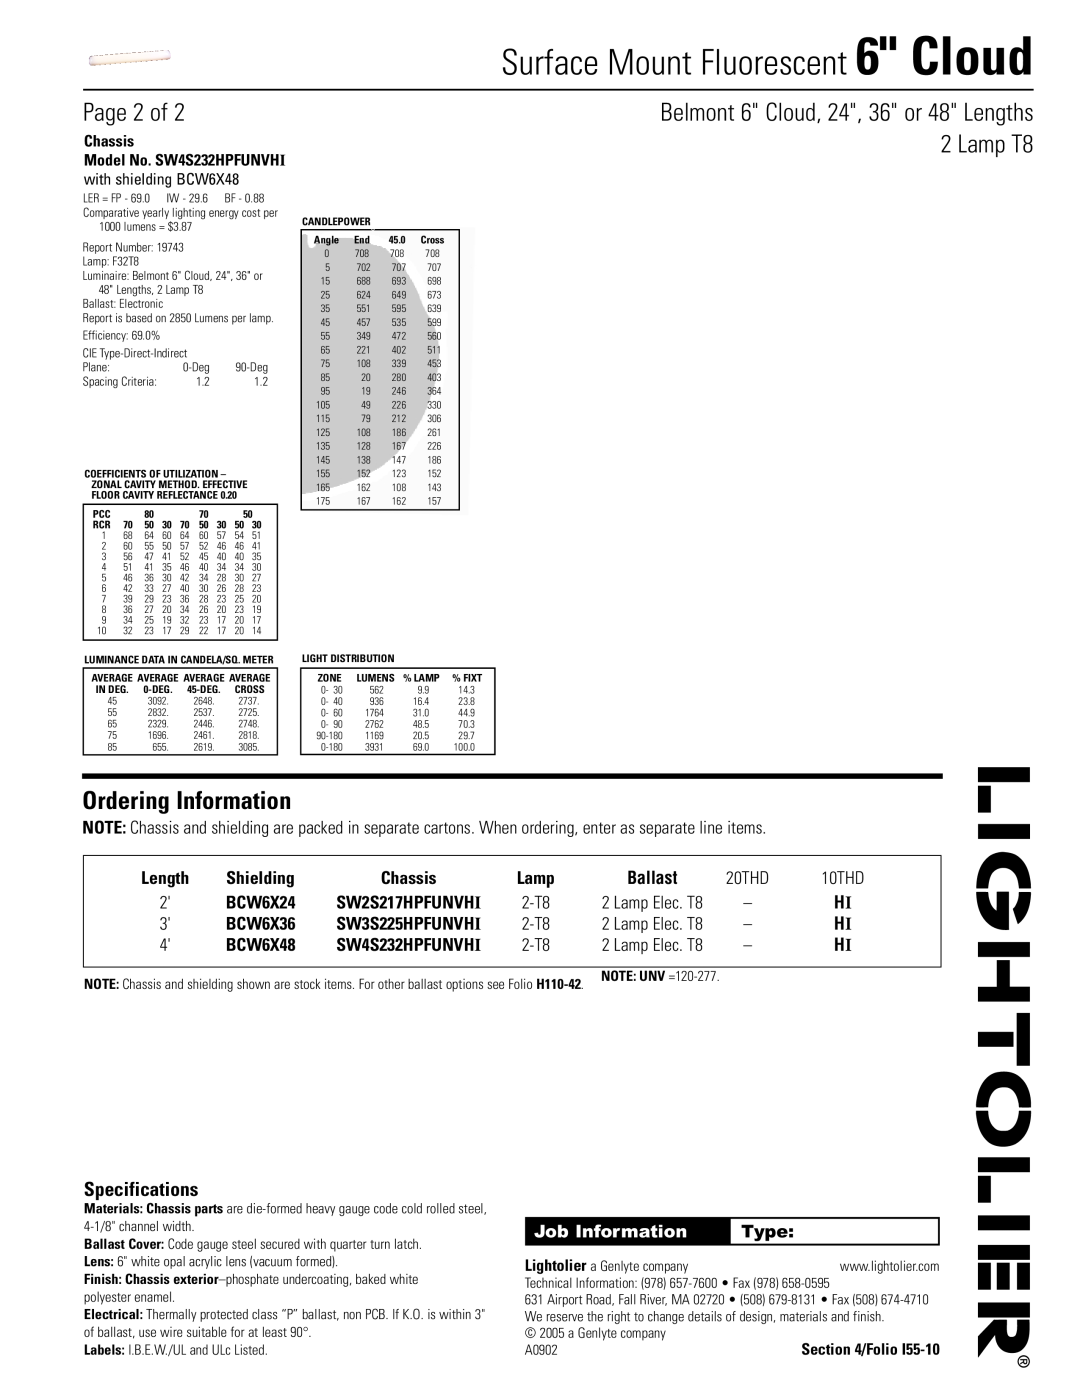 Lightolier 6" Cloud Page 2 of, Specifications, Shielding, BCW6X24, BCW6X36, BCW6X48, Chassis, Ordering Information, Type 